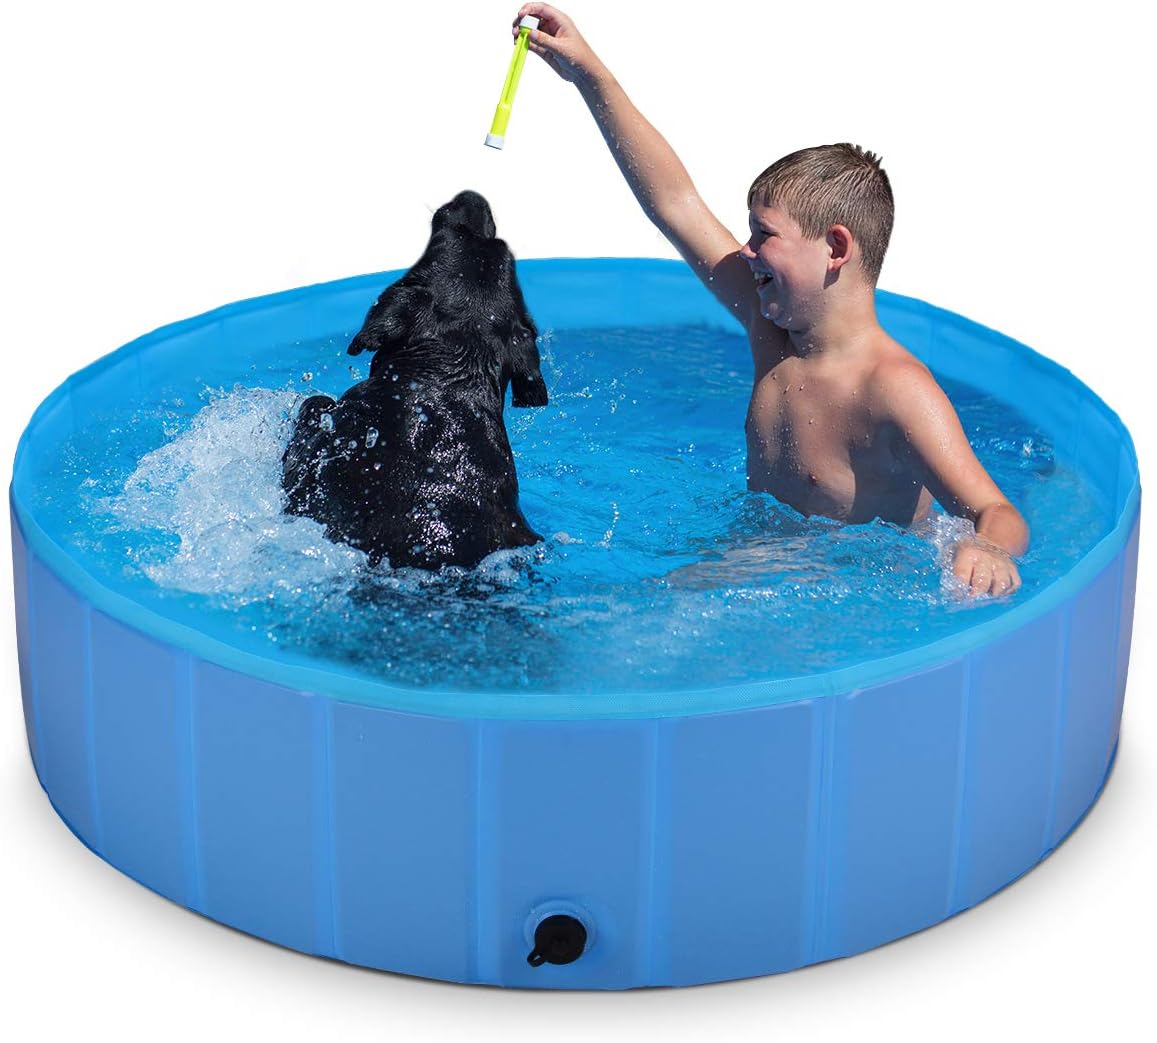 Folding Pool for Dogs,48inch Foldable Pet Kids Swimming Pool,Portable Collapsible Kiddie Bath Pool for Outdoor Backyard PVC Bathing Shower Tub Bathtub for Large Medium Small Dogs and Cats L-48